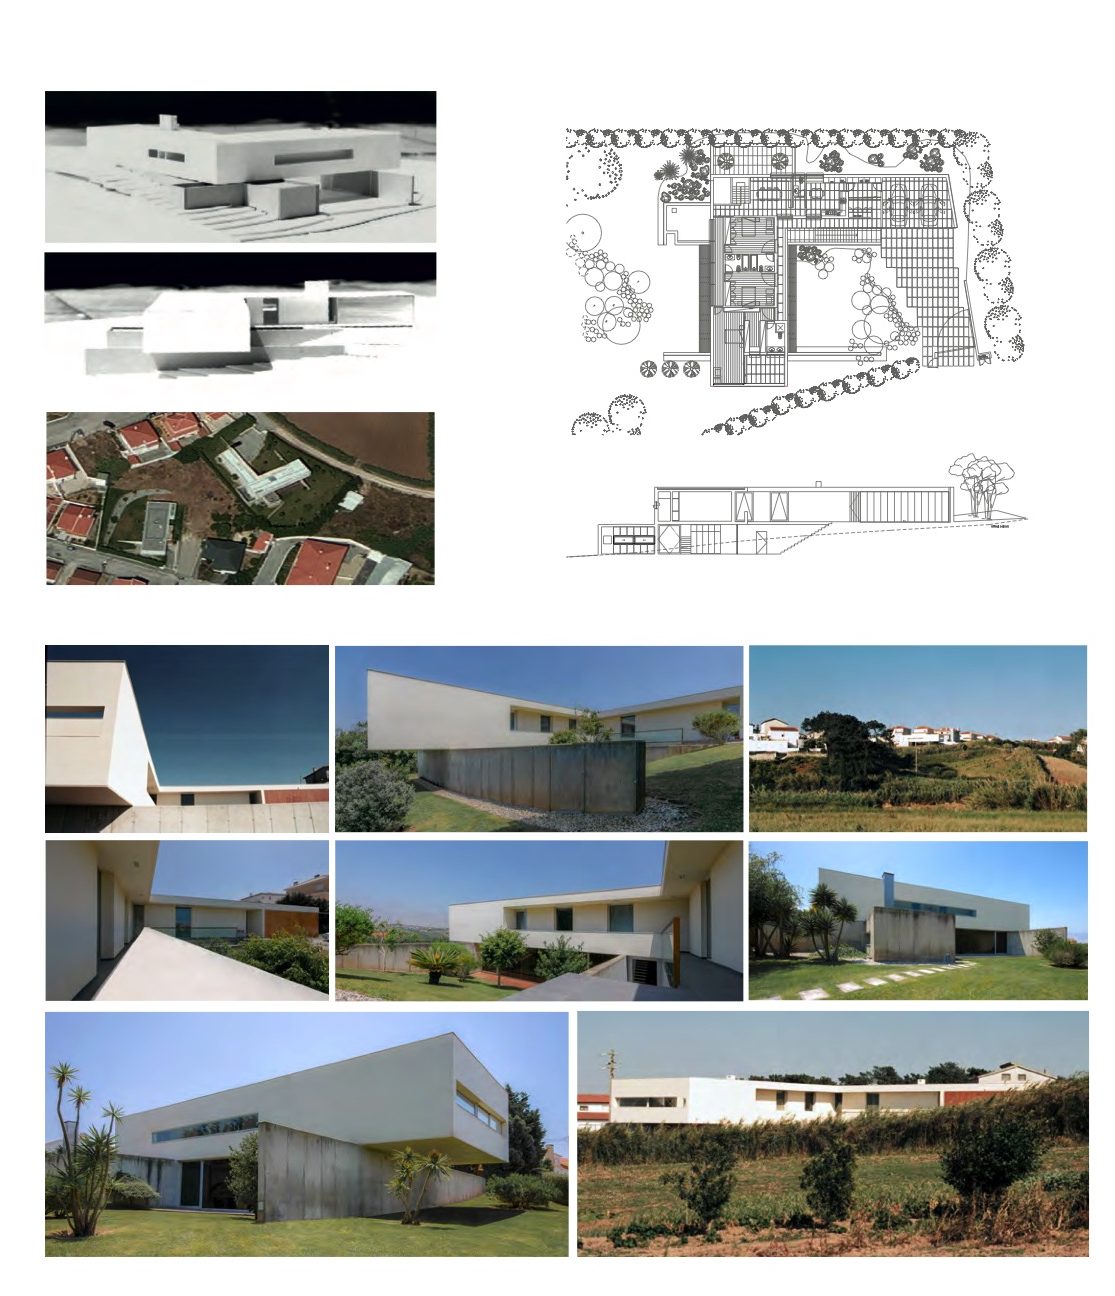 L. Garcia House, Seixal Lourinhã – 4 bedroom house and landscaping works - 541 sq m of gross area of construction in plot of 2006 sq m.